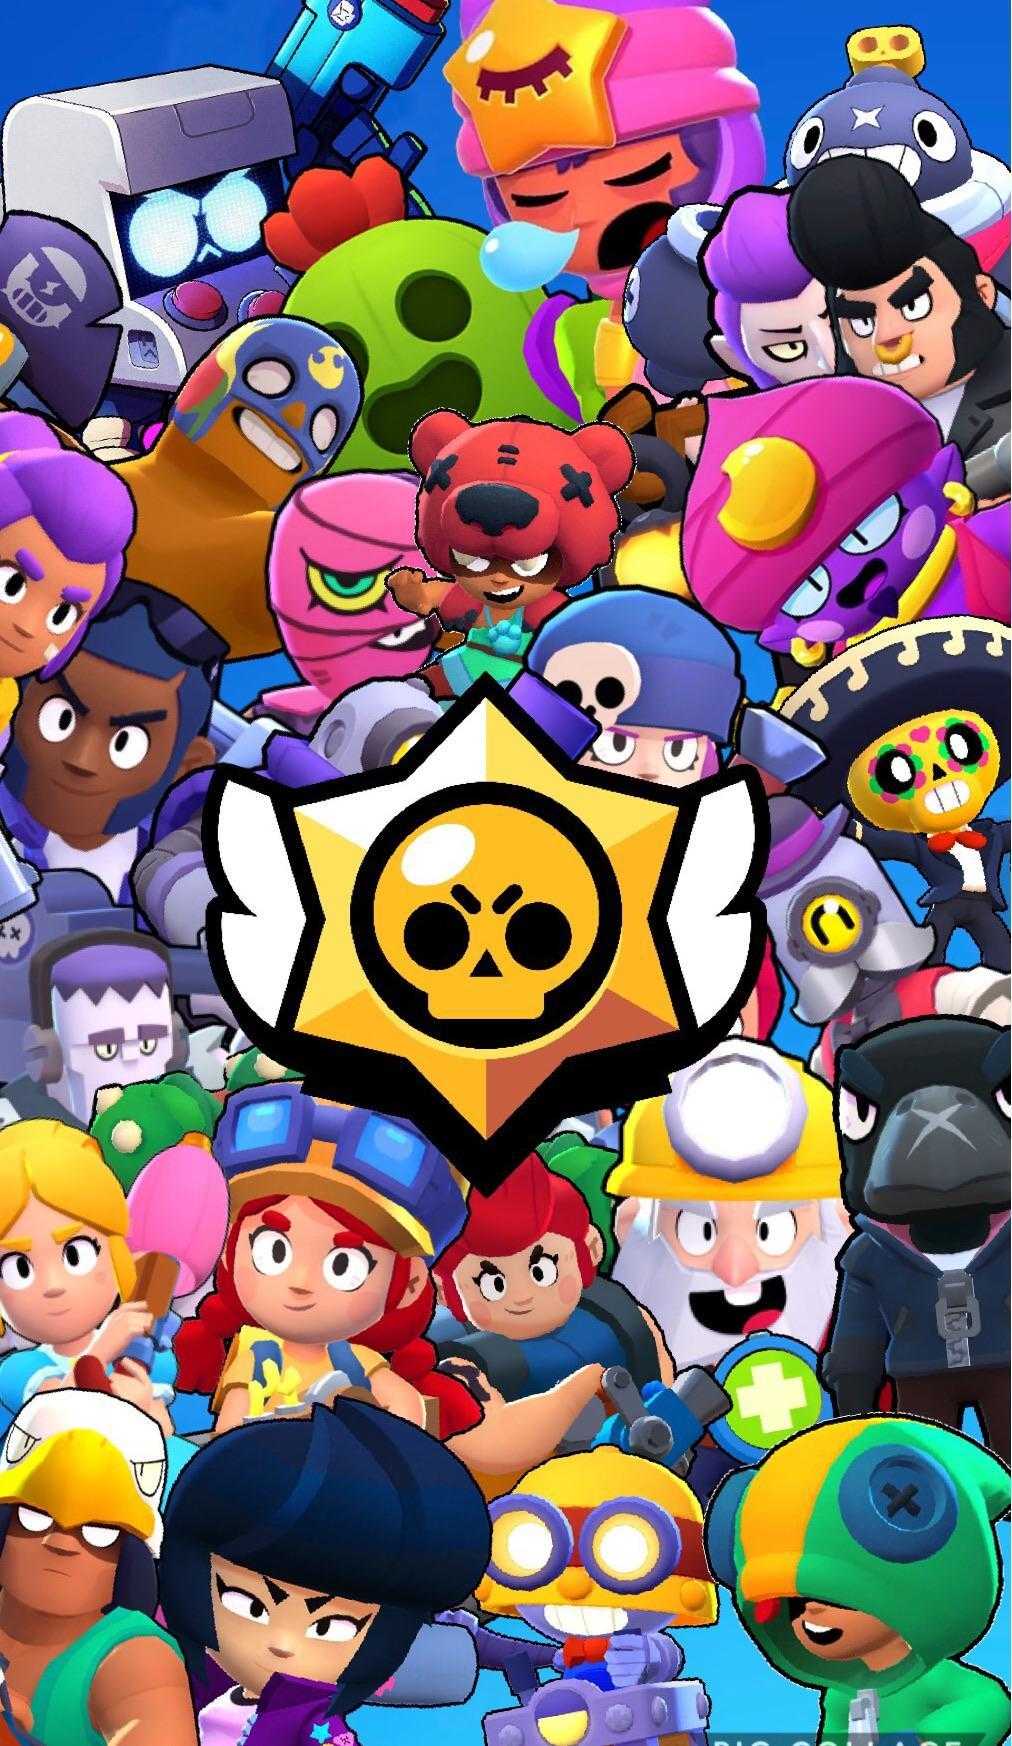 Brawl Stars Wallpaper Iphone Kolpaper Awesome Free Hd Wallpapers - brawling stars on 2 devices